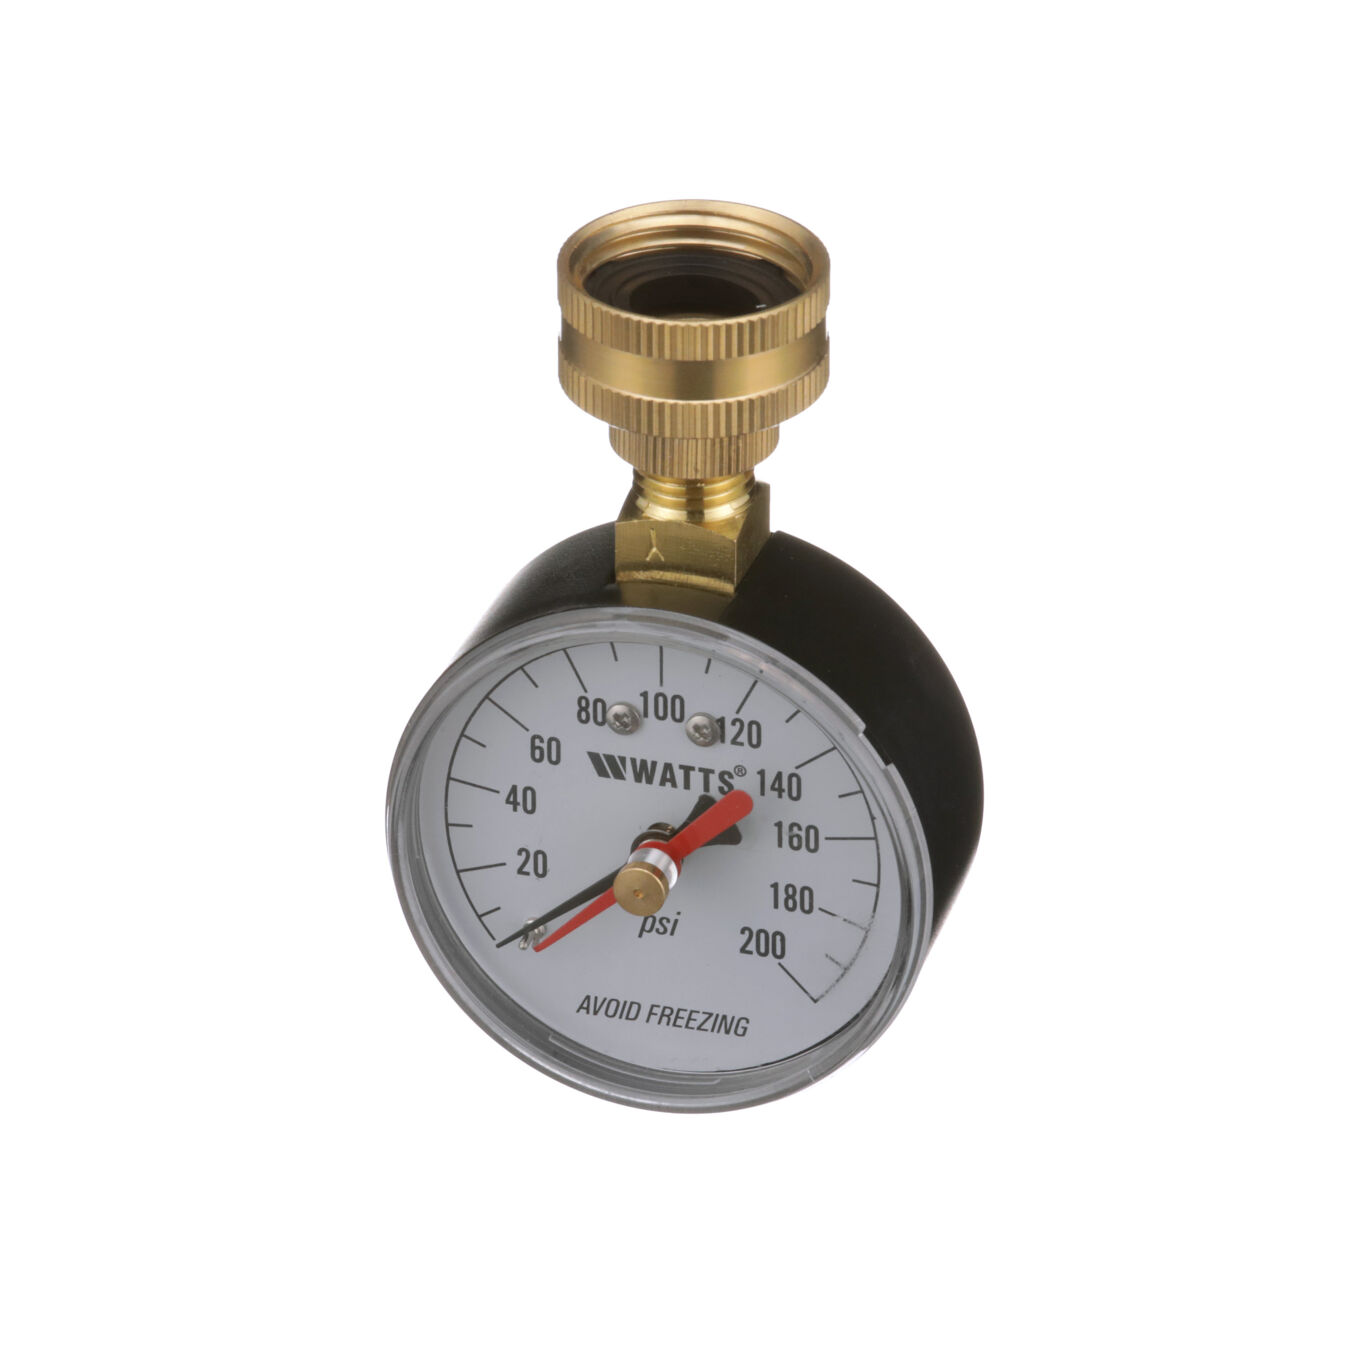 Pressure gauge showing top with connections.